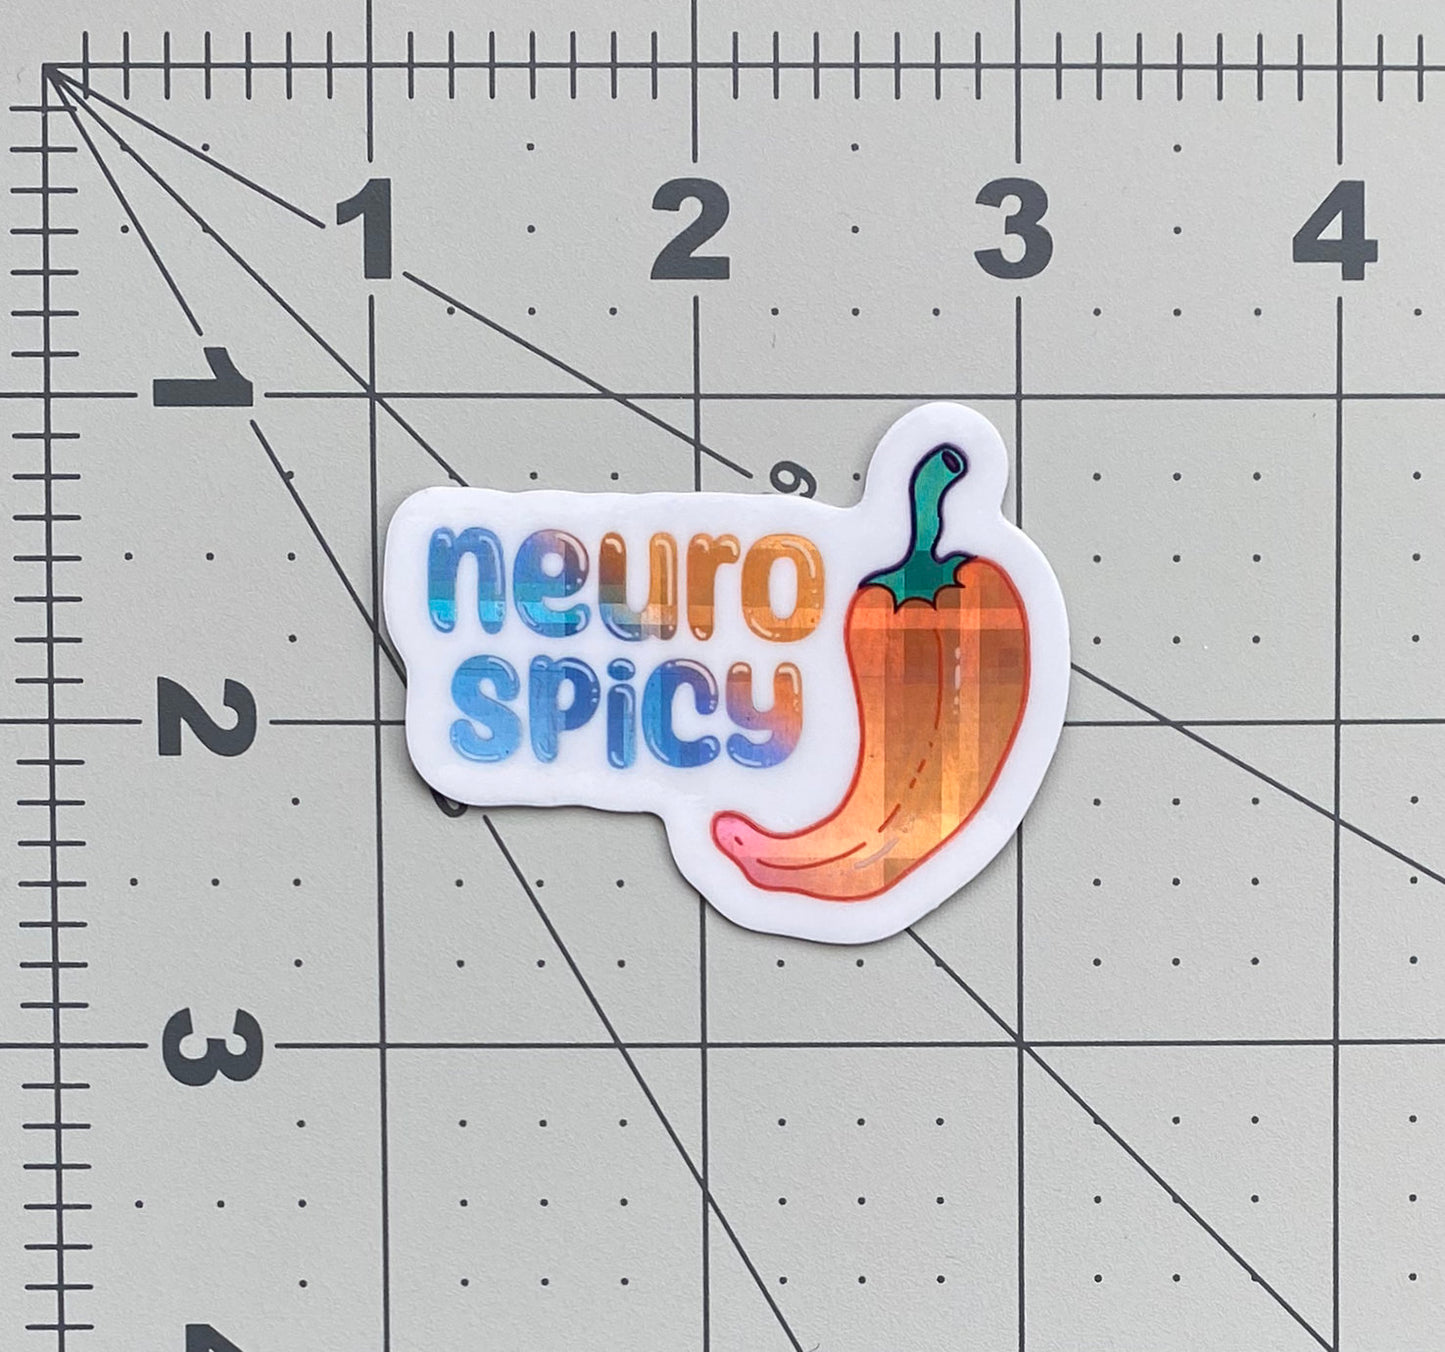 A holographic vinyl sticker with an illustration of a pepper and the words "neuro spicy". The holographic material is a blue to purple to orange gradient pattern with a plaid effect. The sticker sits on a ruled background to show its size.